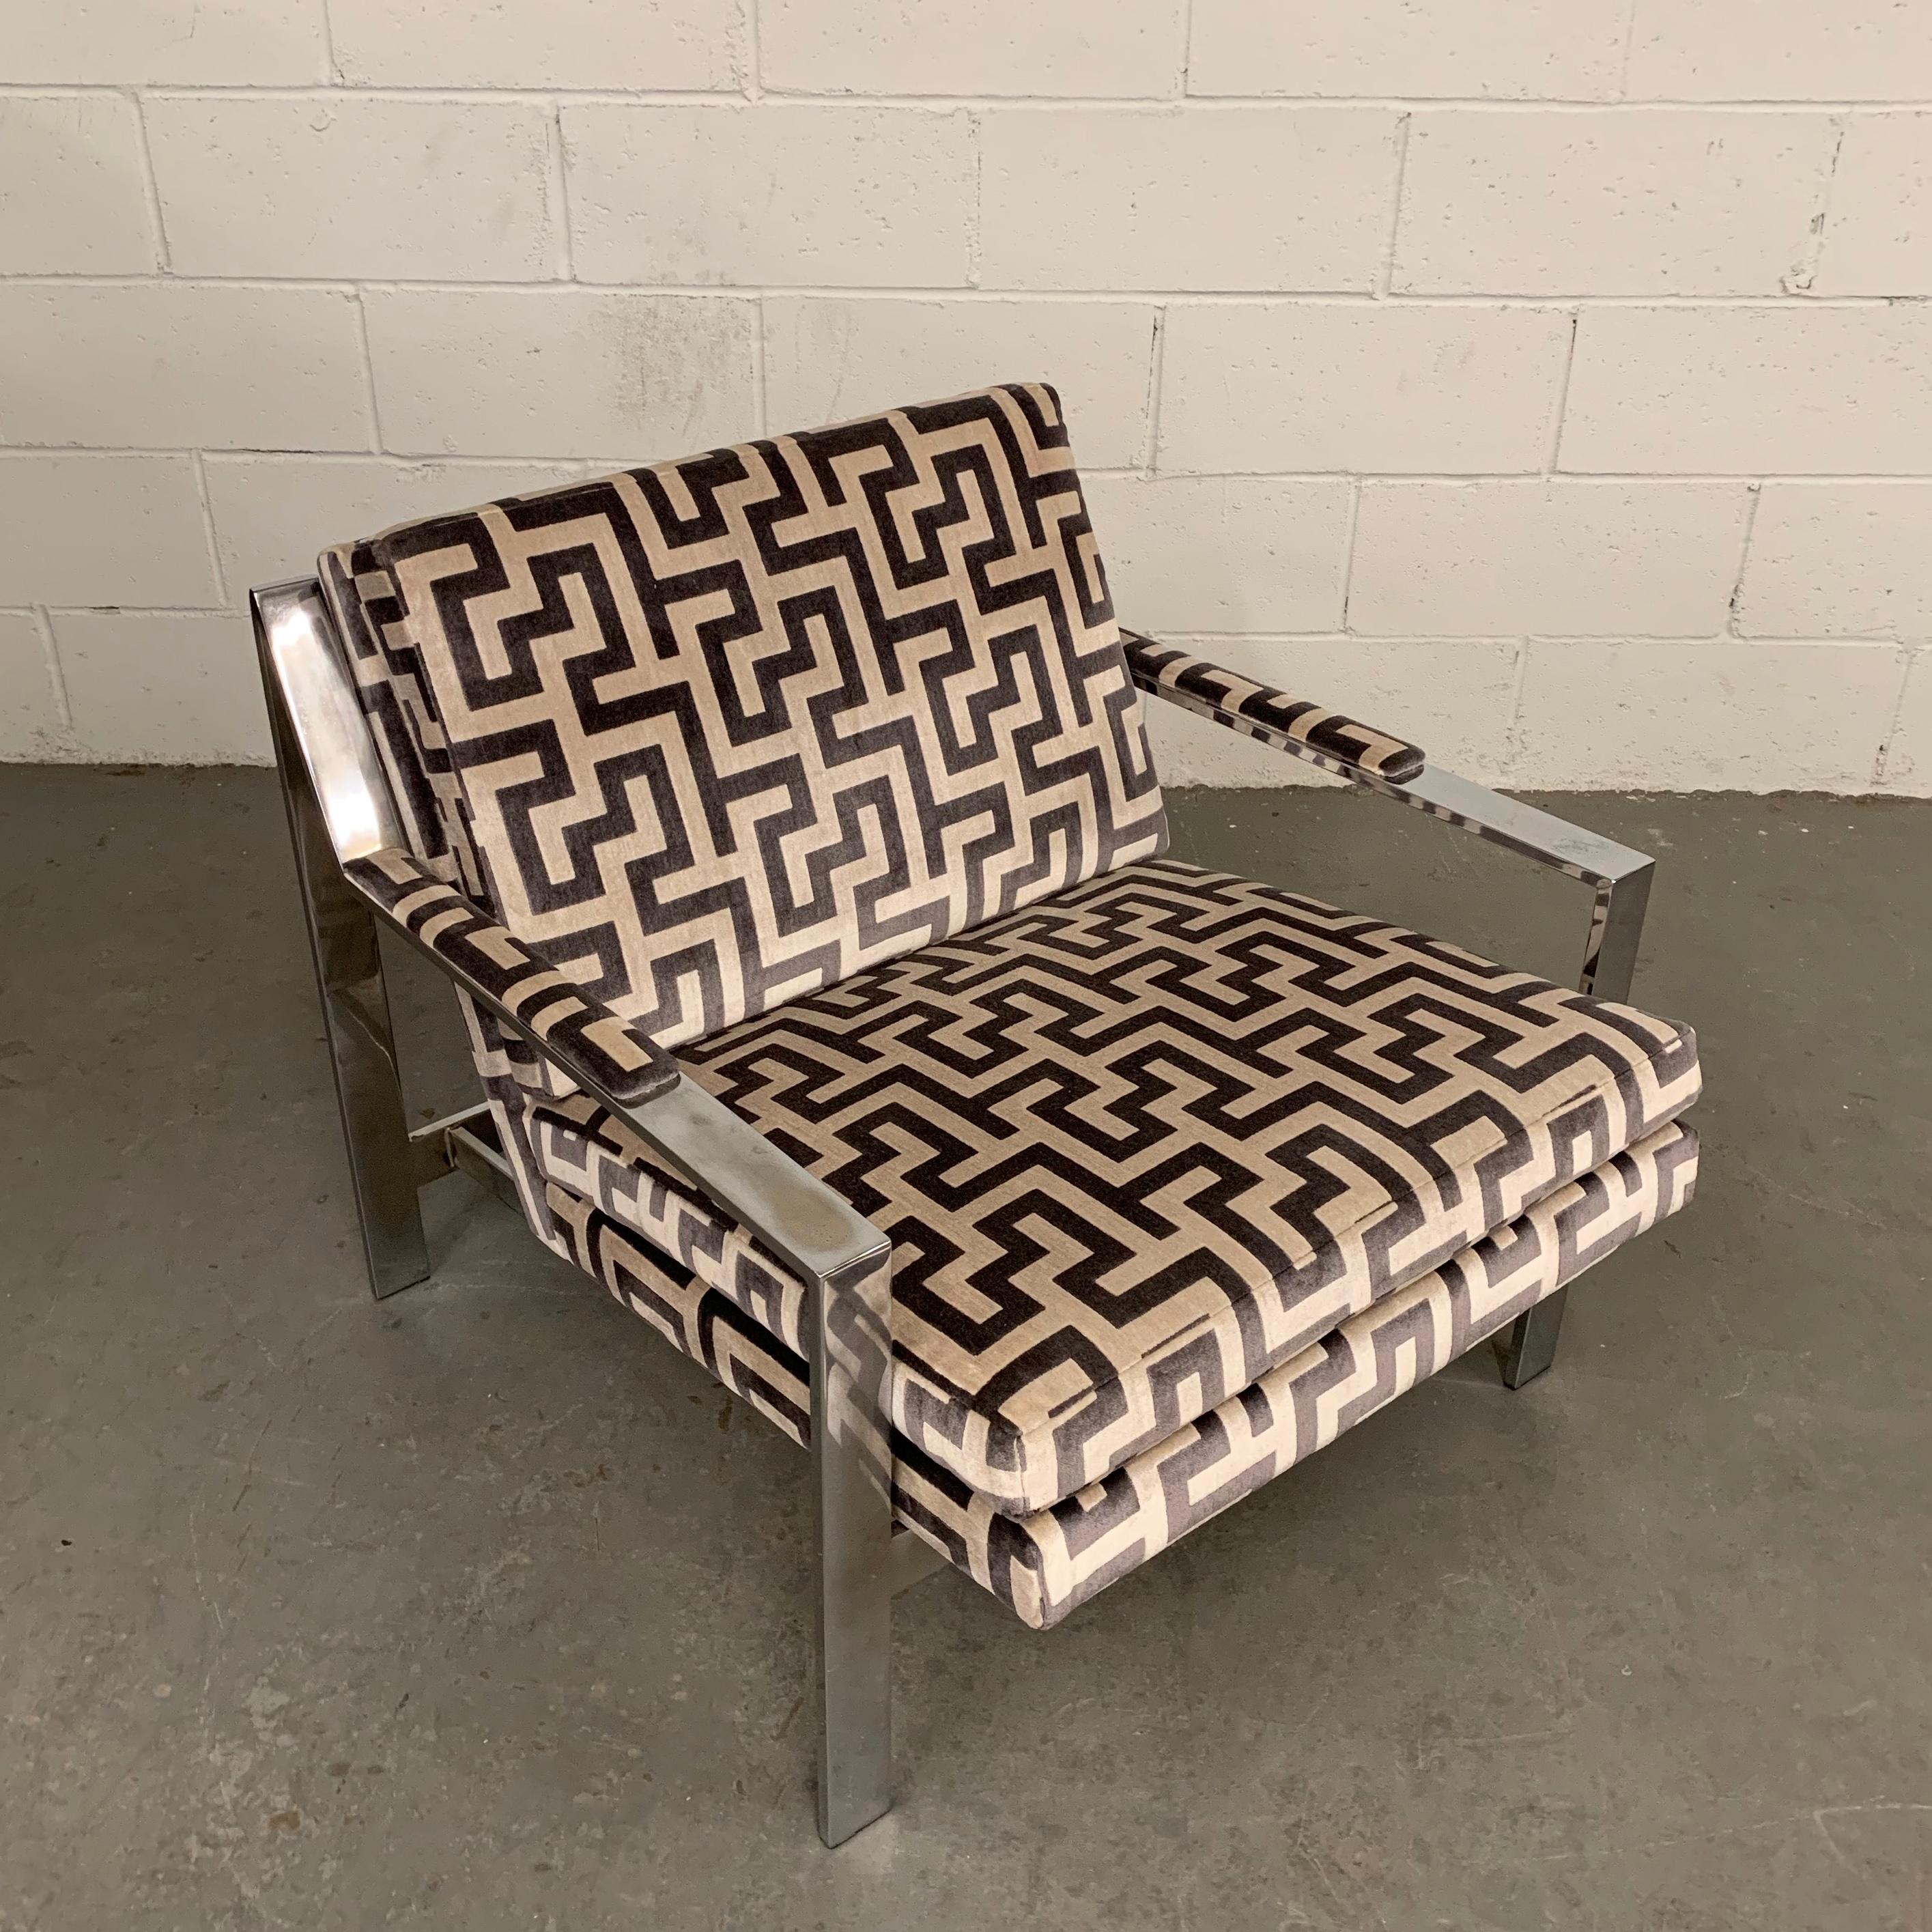 Mid-Century Modern, model #232, lounge chair by Cy Mann, in the style of Milo Baughman features a flat bar chrome frame with new upholstery in a stunning, Keith Haring inspired, geometric, velvet print. We also have a Milo Baughman for Thayer Coggin